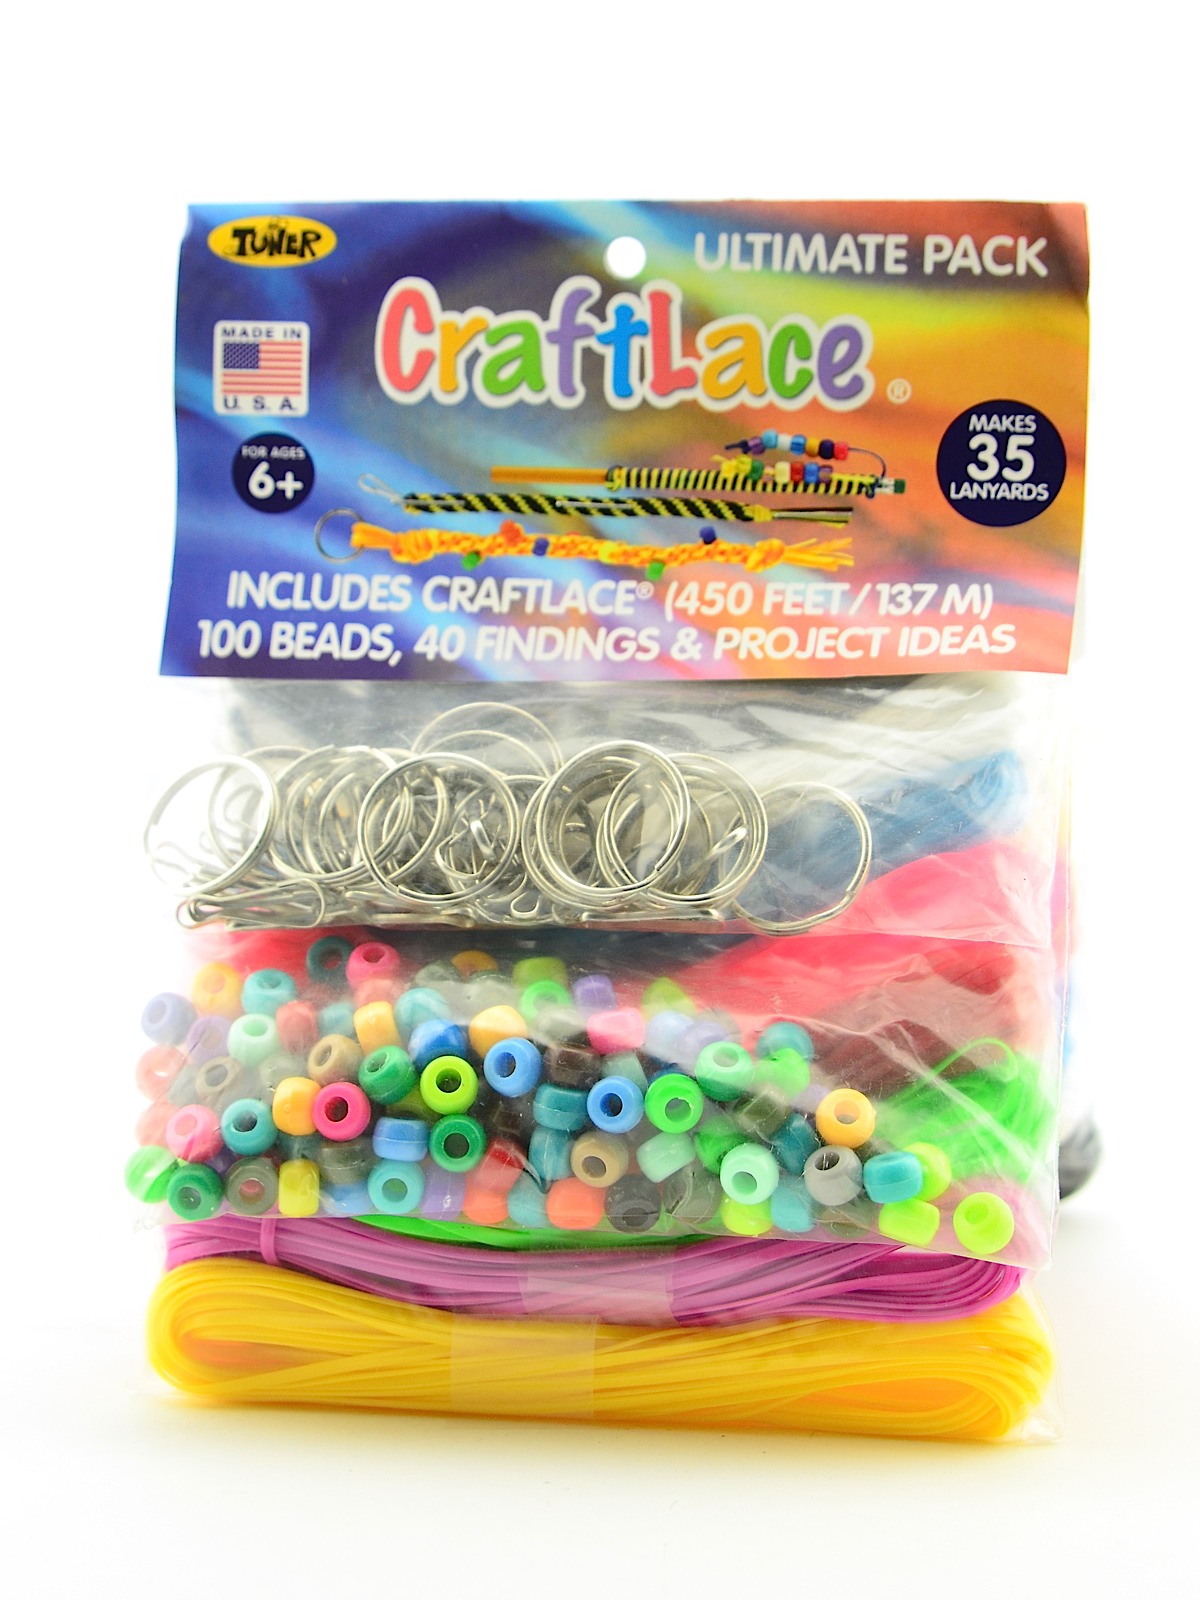 Craft Lace Packs Ultimate Makes 35 Projects